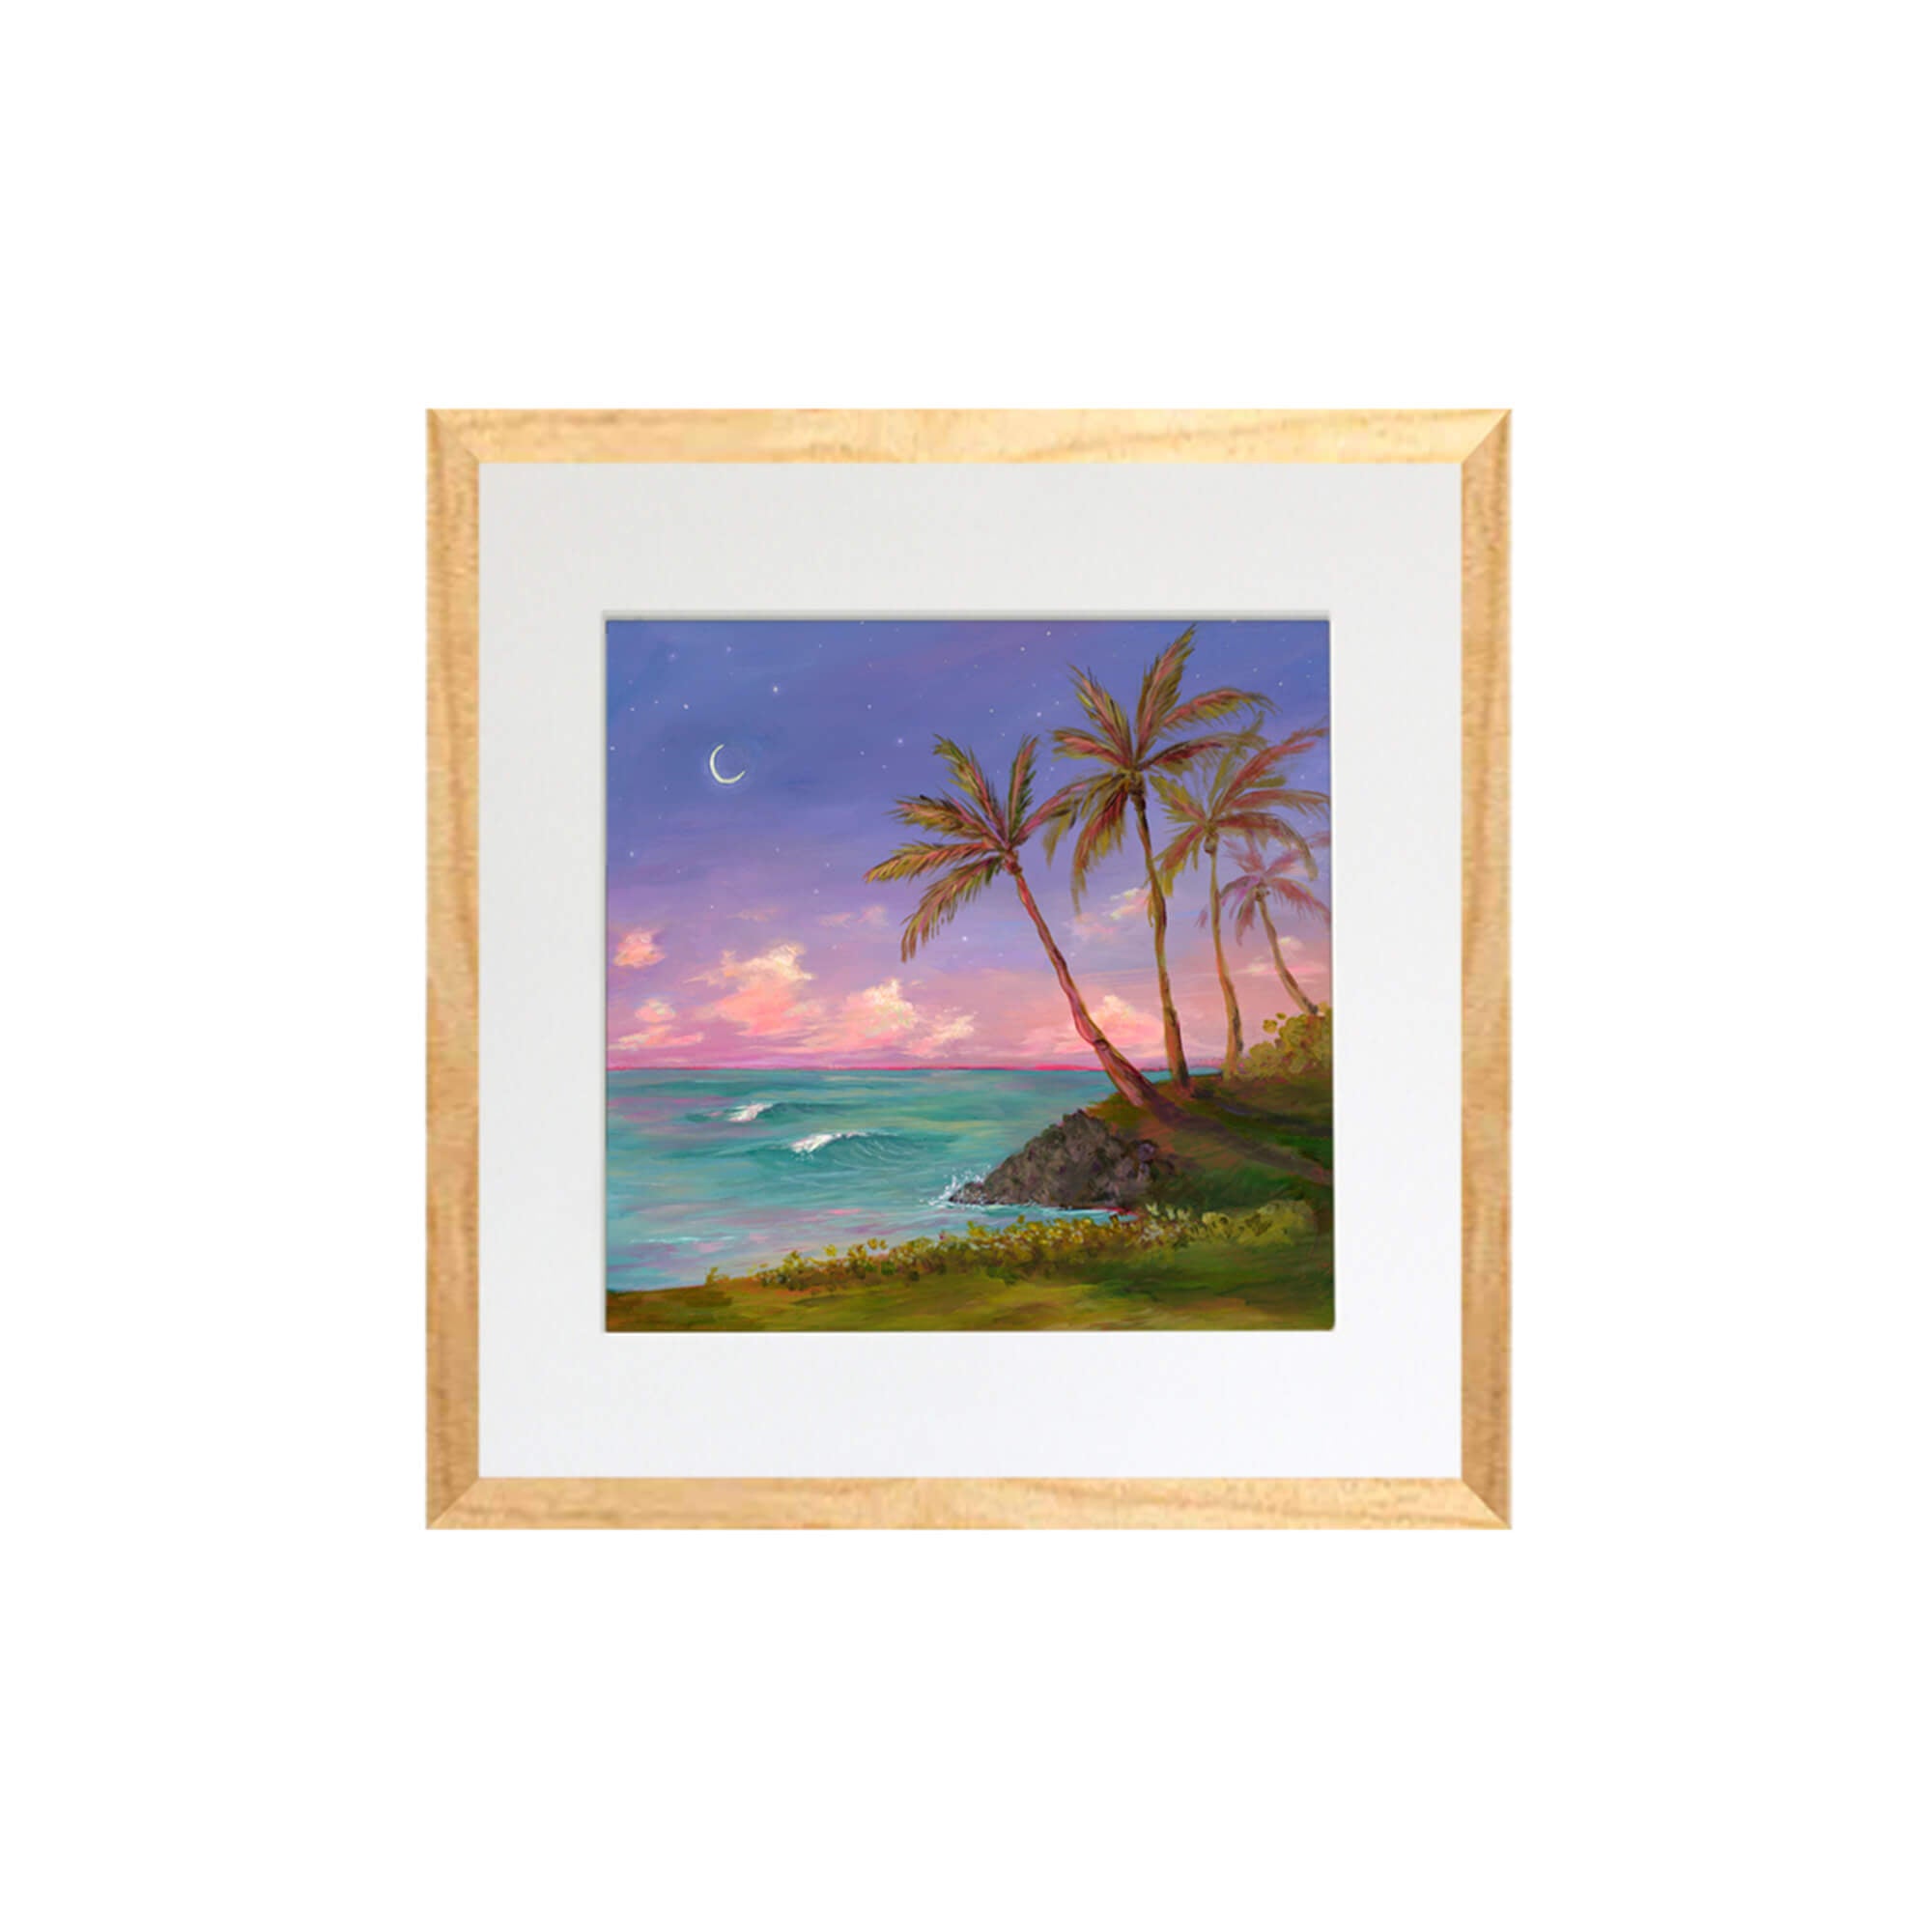 A perfect seascape and horizon view with pastel colors by Hawaii artist Lindsay Wilkins